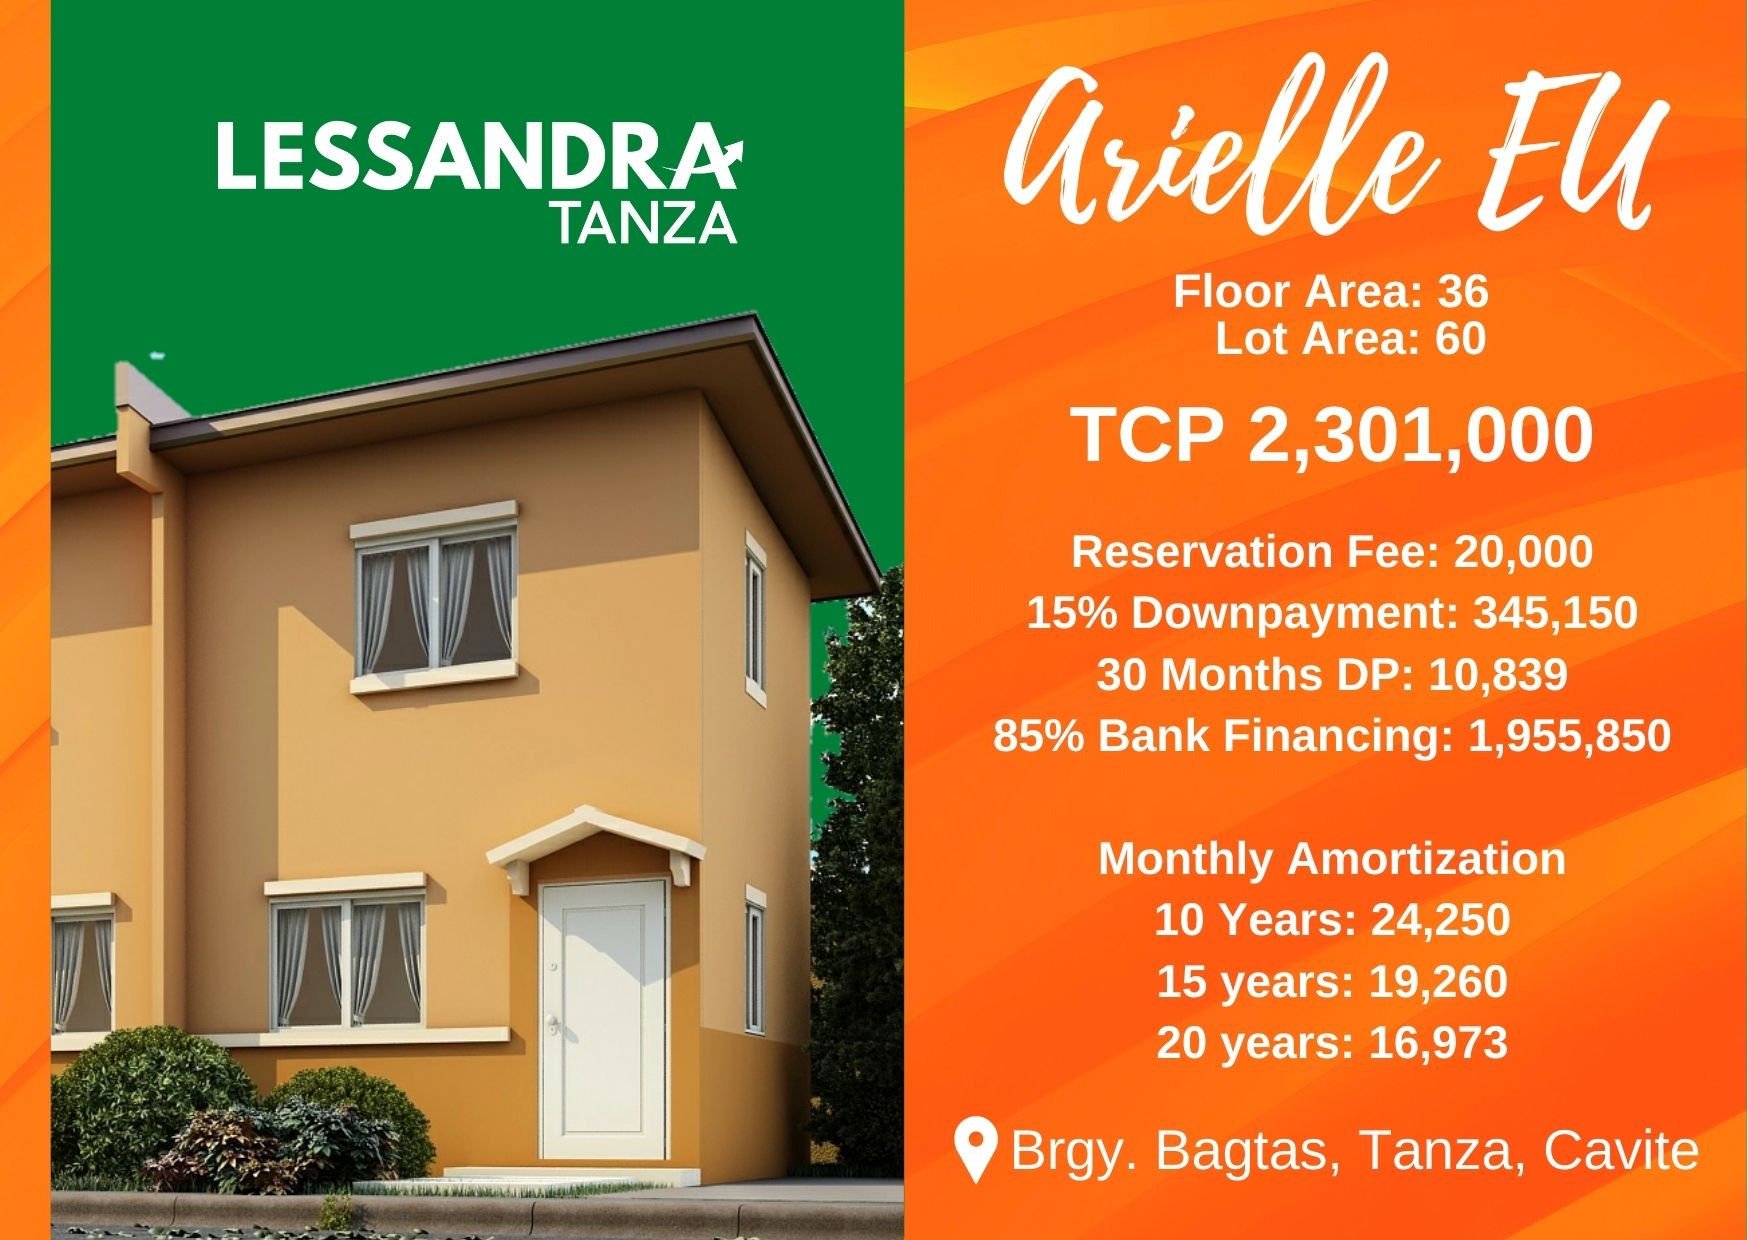 Affordable House and Lot in Tanza Arielle EU